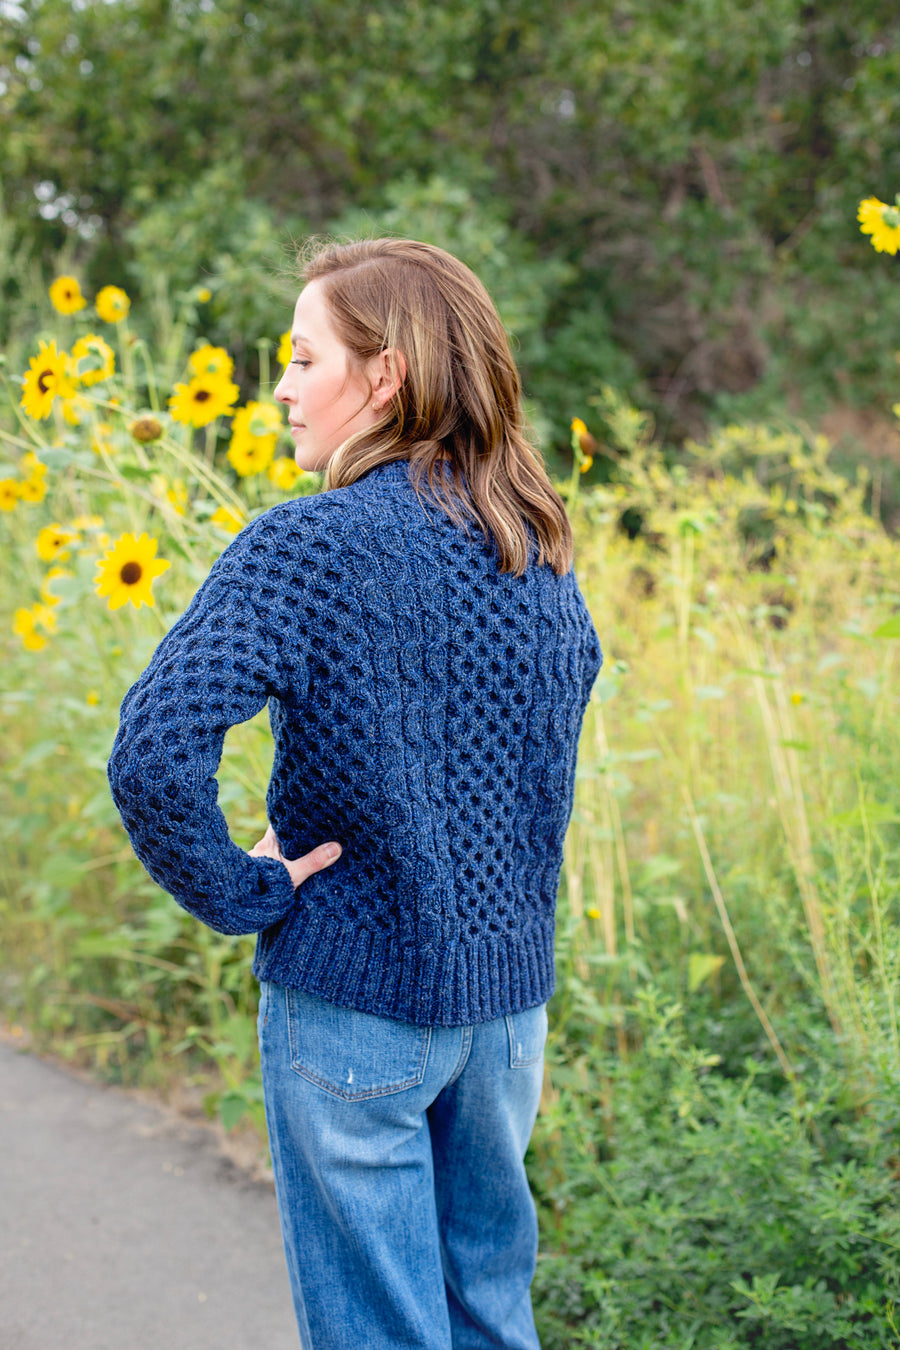 Tayler Anne Knits - The Apiary Sweater wool bundle